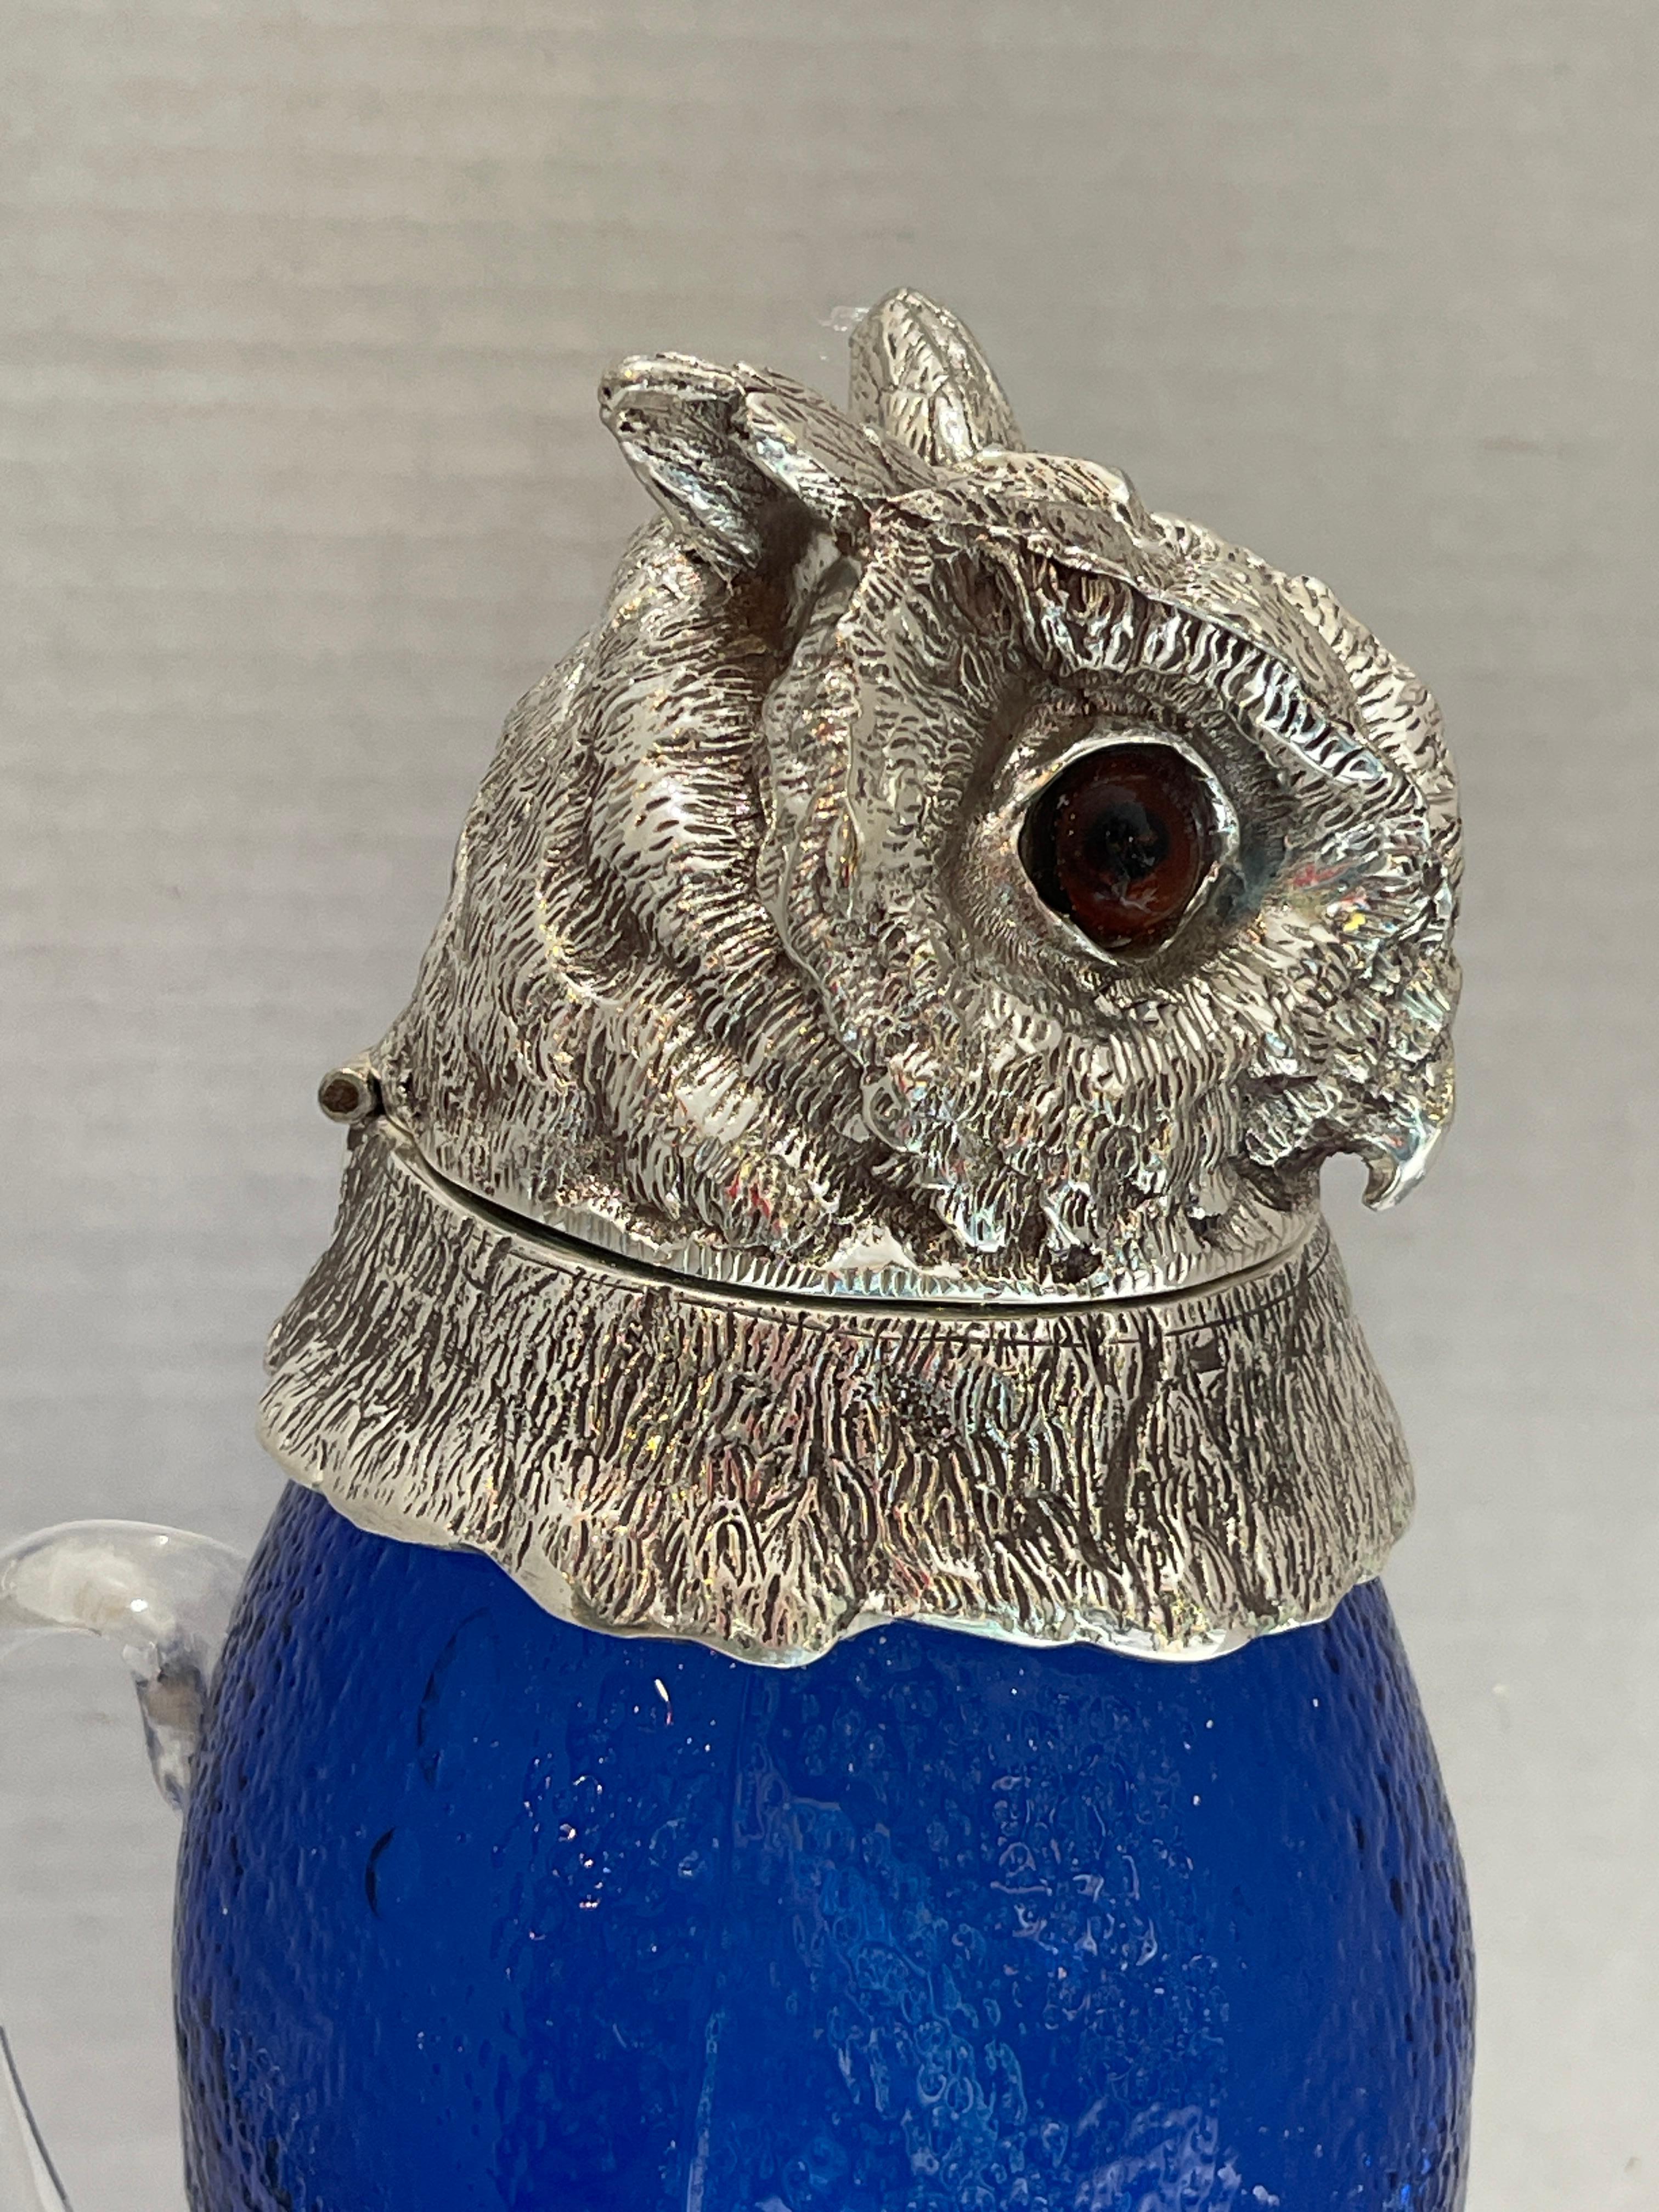 Novelty Silver Plate and Cobalt Blue Glass Owl Claret Jug Decanter 20Th C. In Good Condition For Sale In West Palm Beach, FL